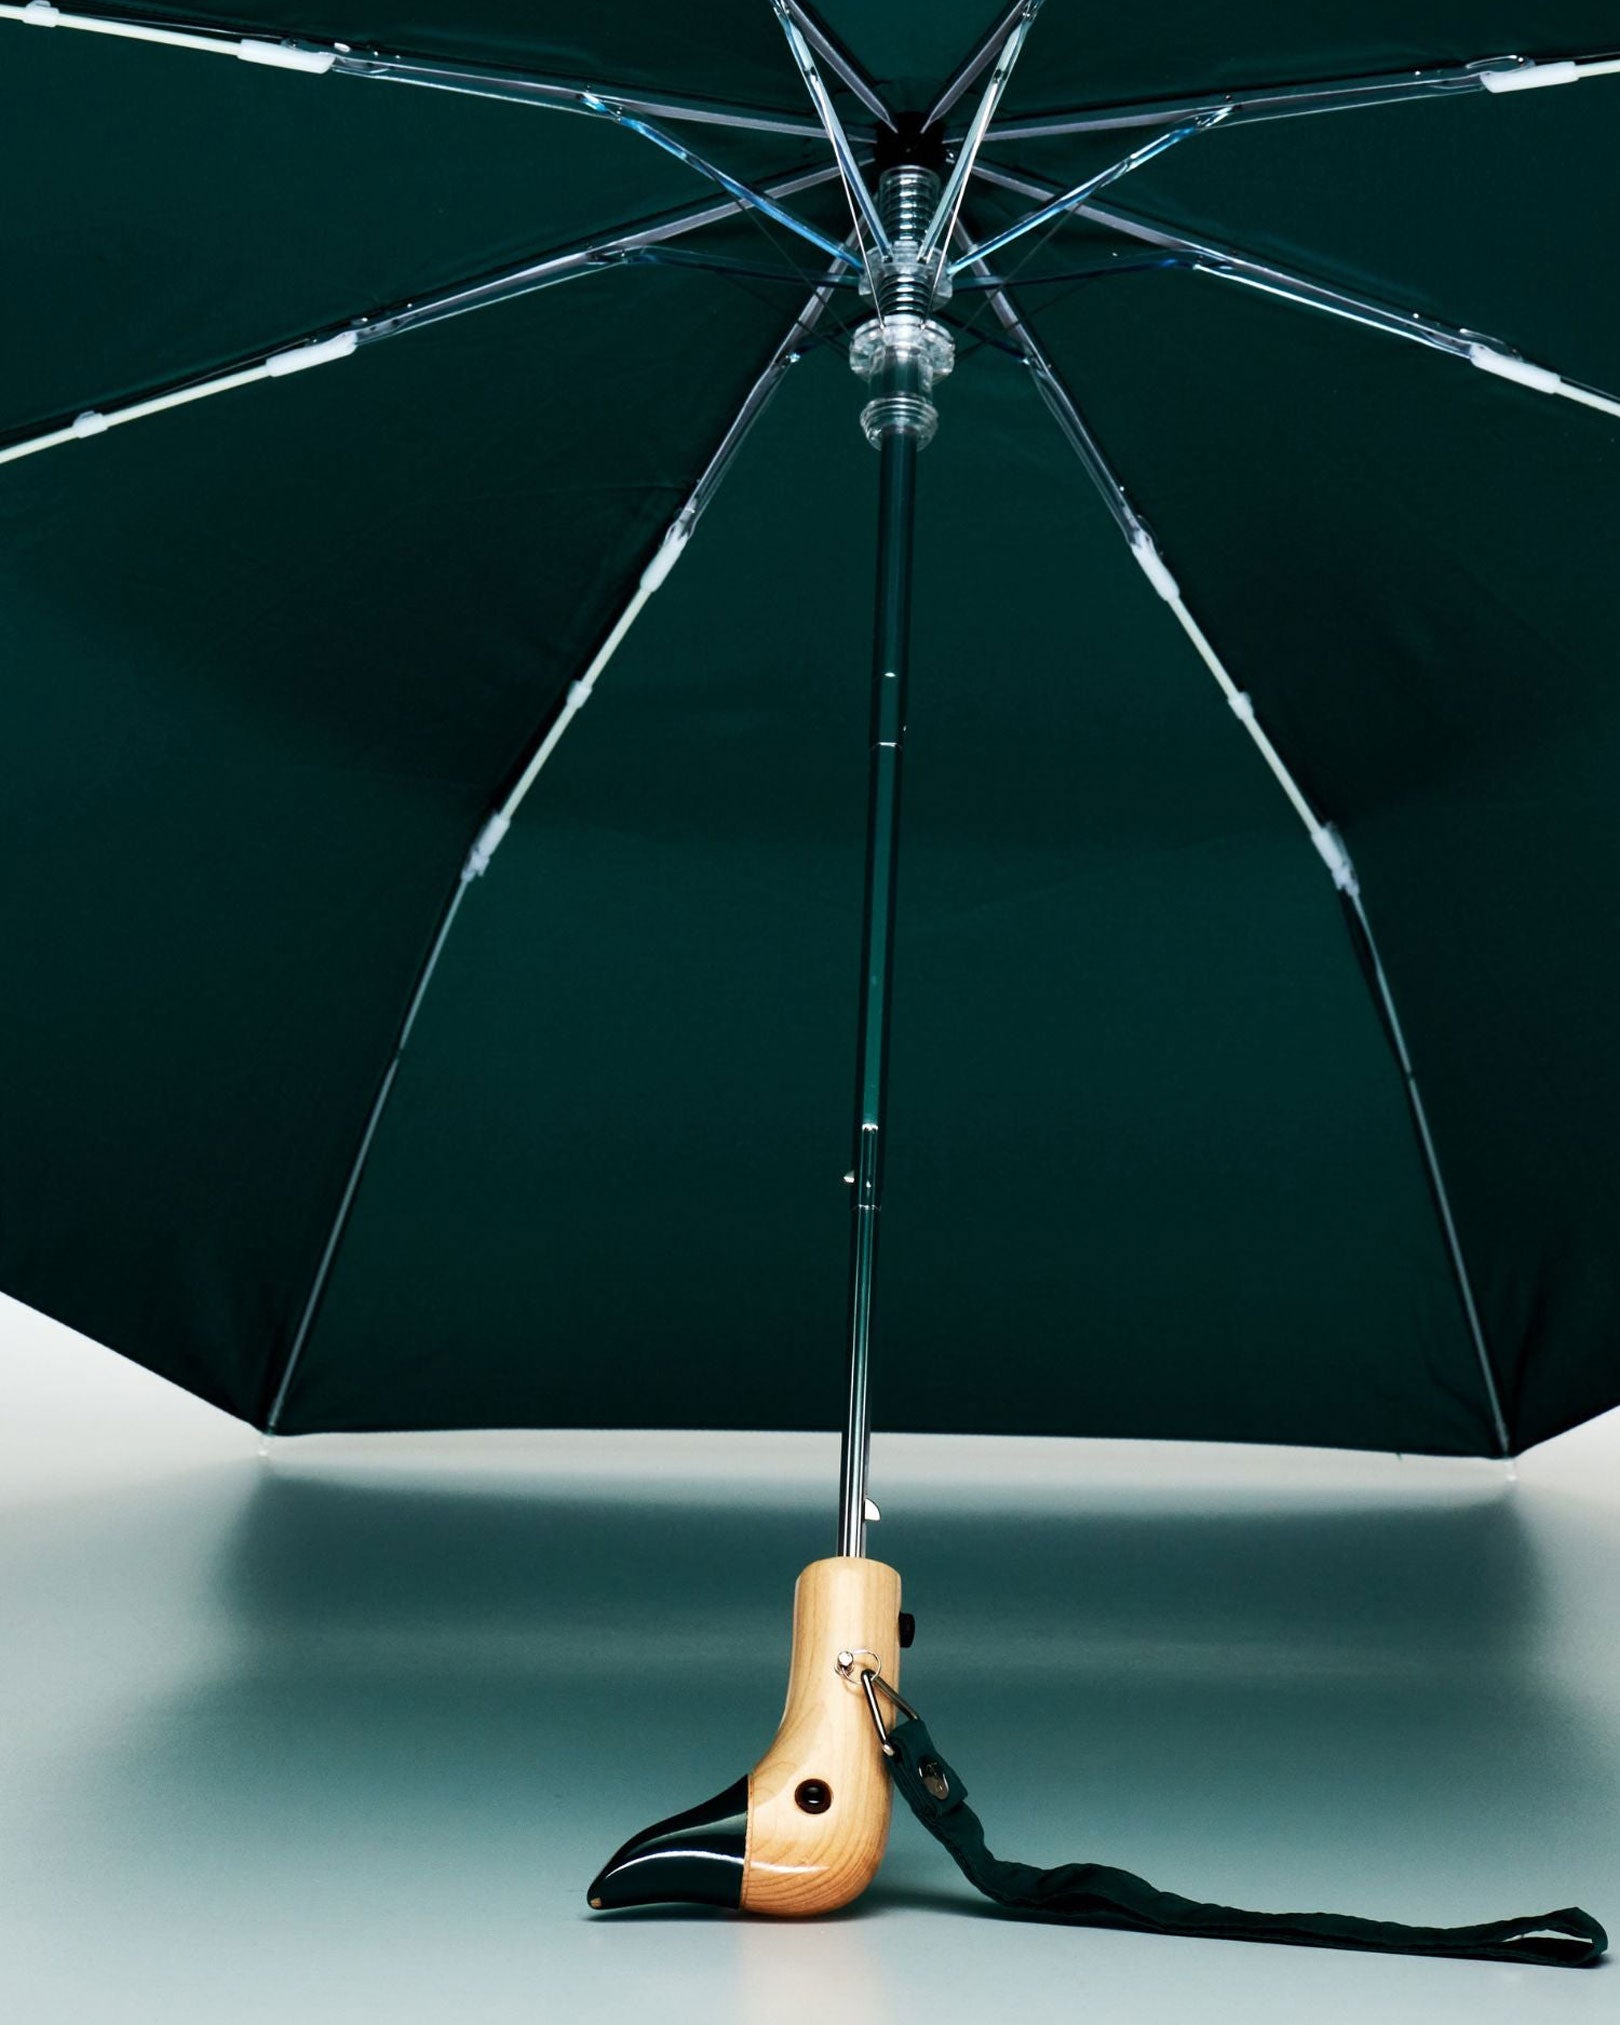 ORIGINAL DUCKHEAD Compact Umbrella in Forest available at Lahn.shop